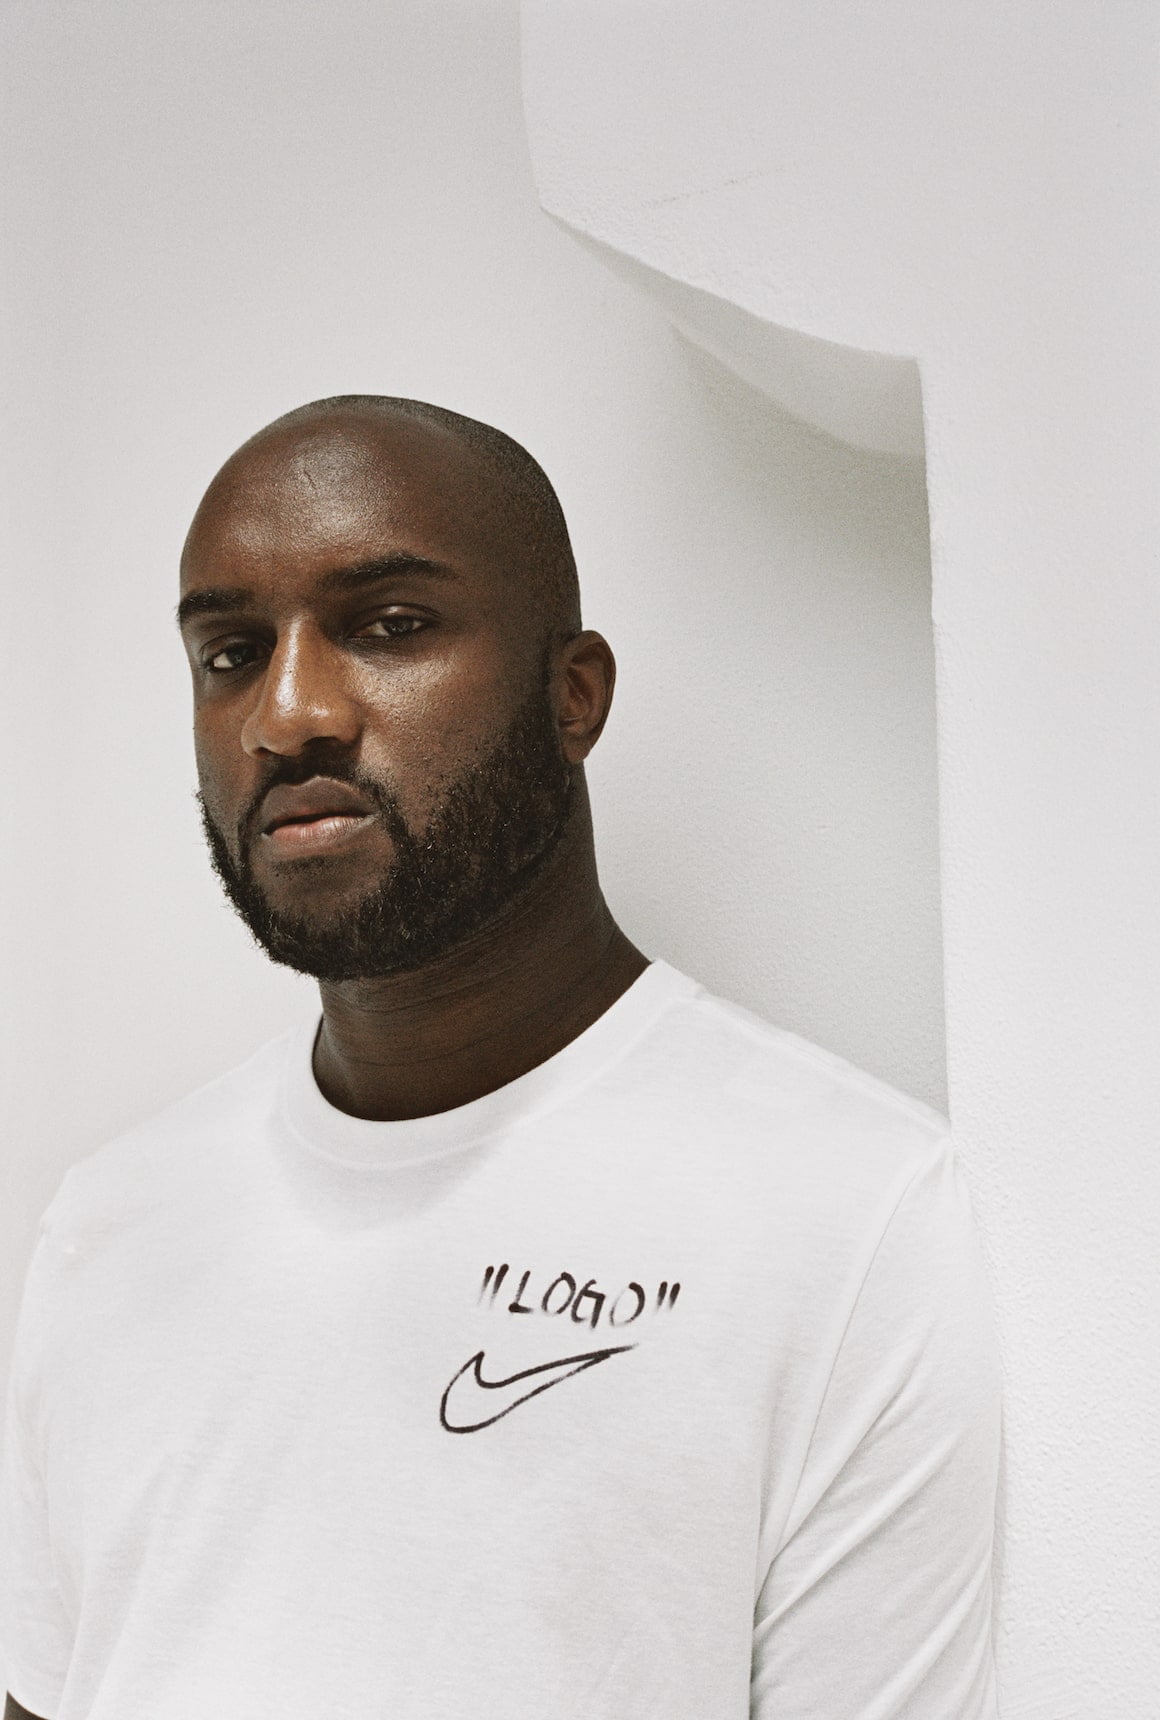 Virgil Abloh on the Off-White Air Jordan 5 and his journey collaborating  with Nike